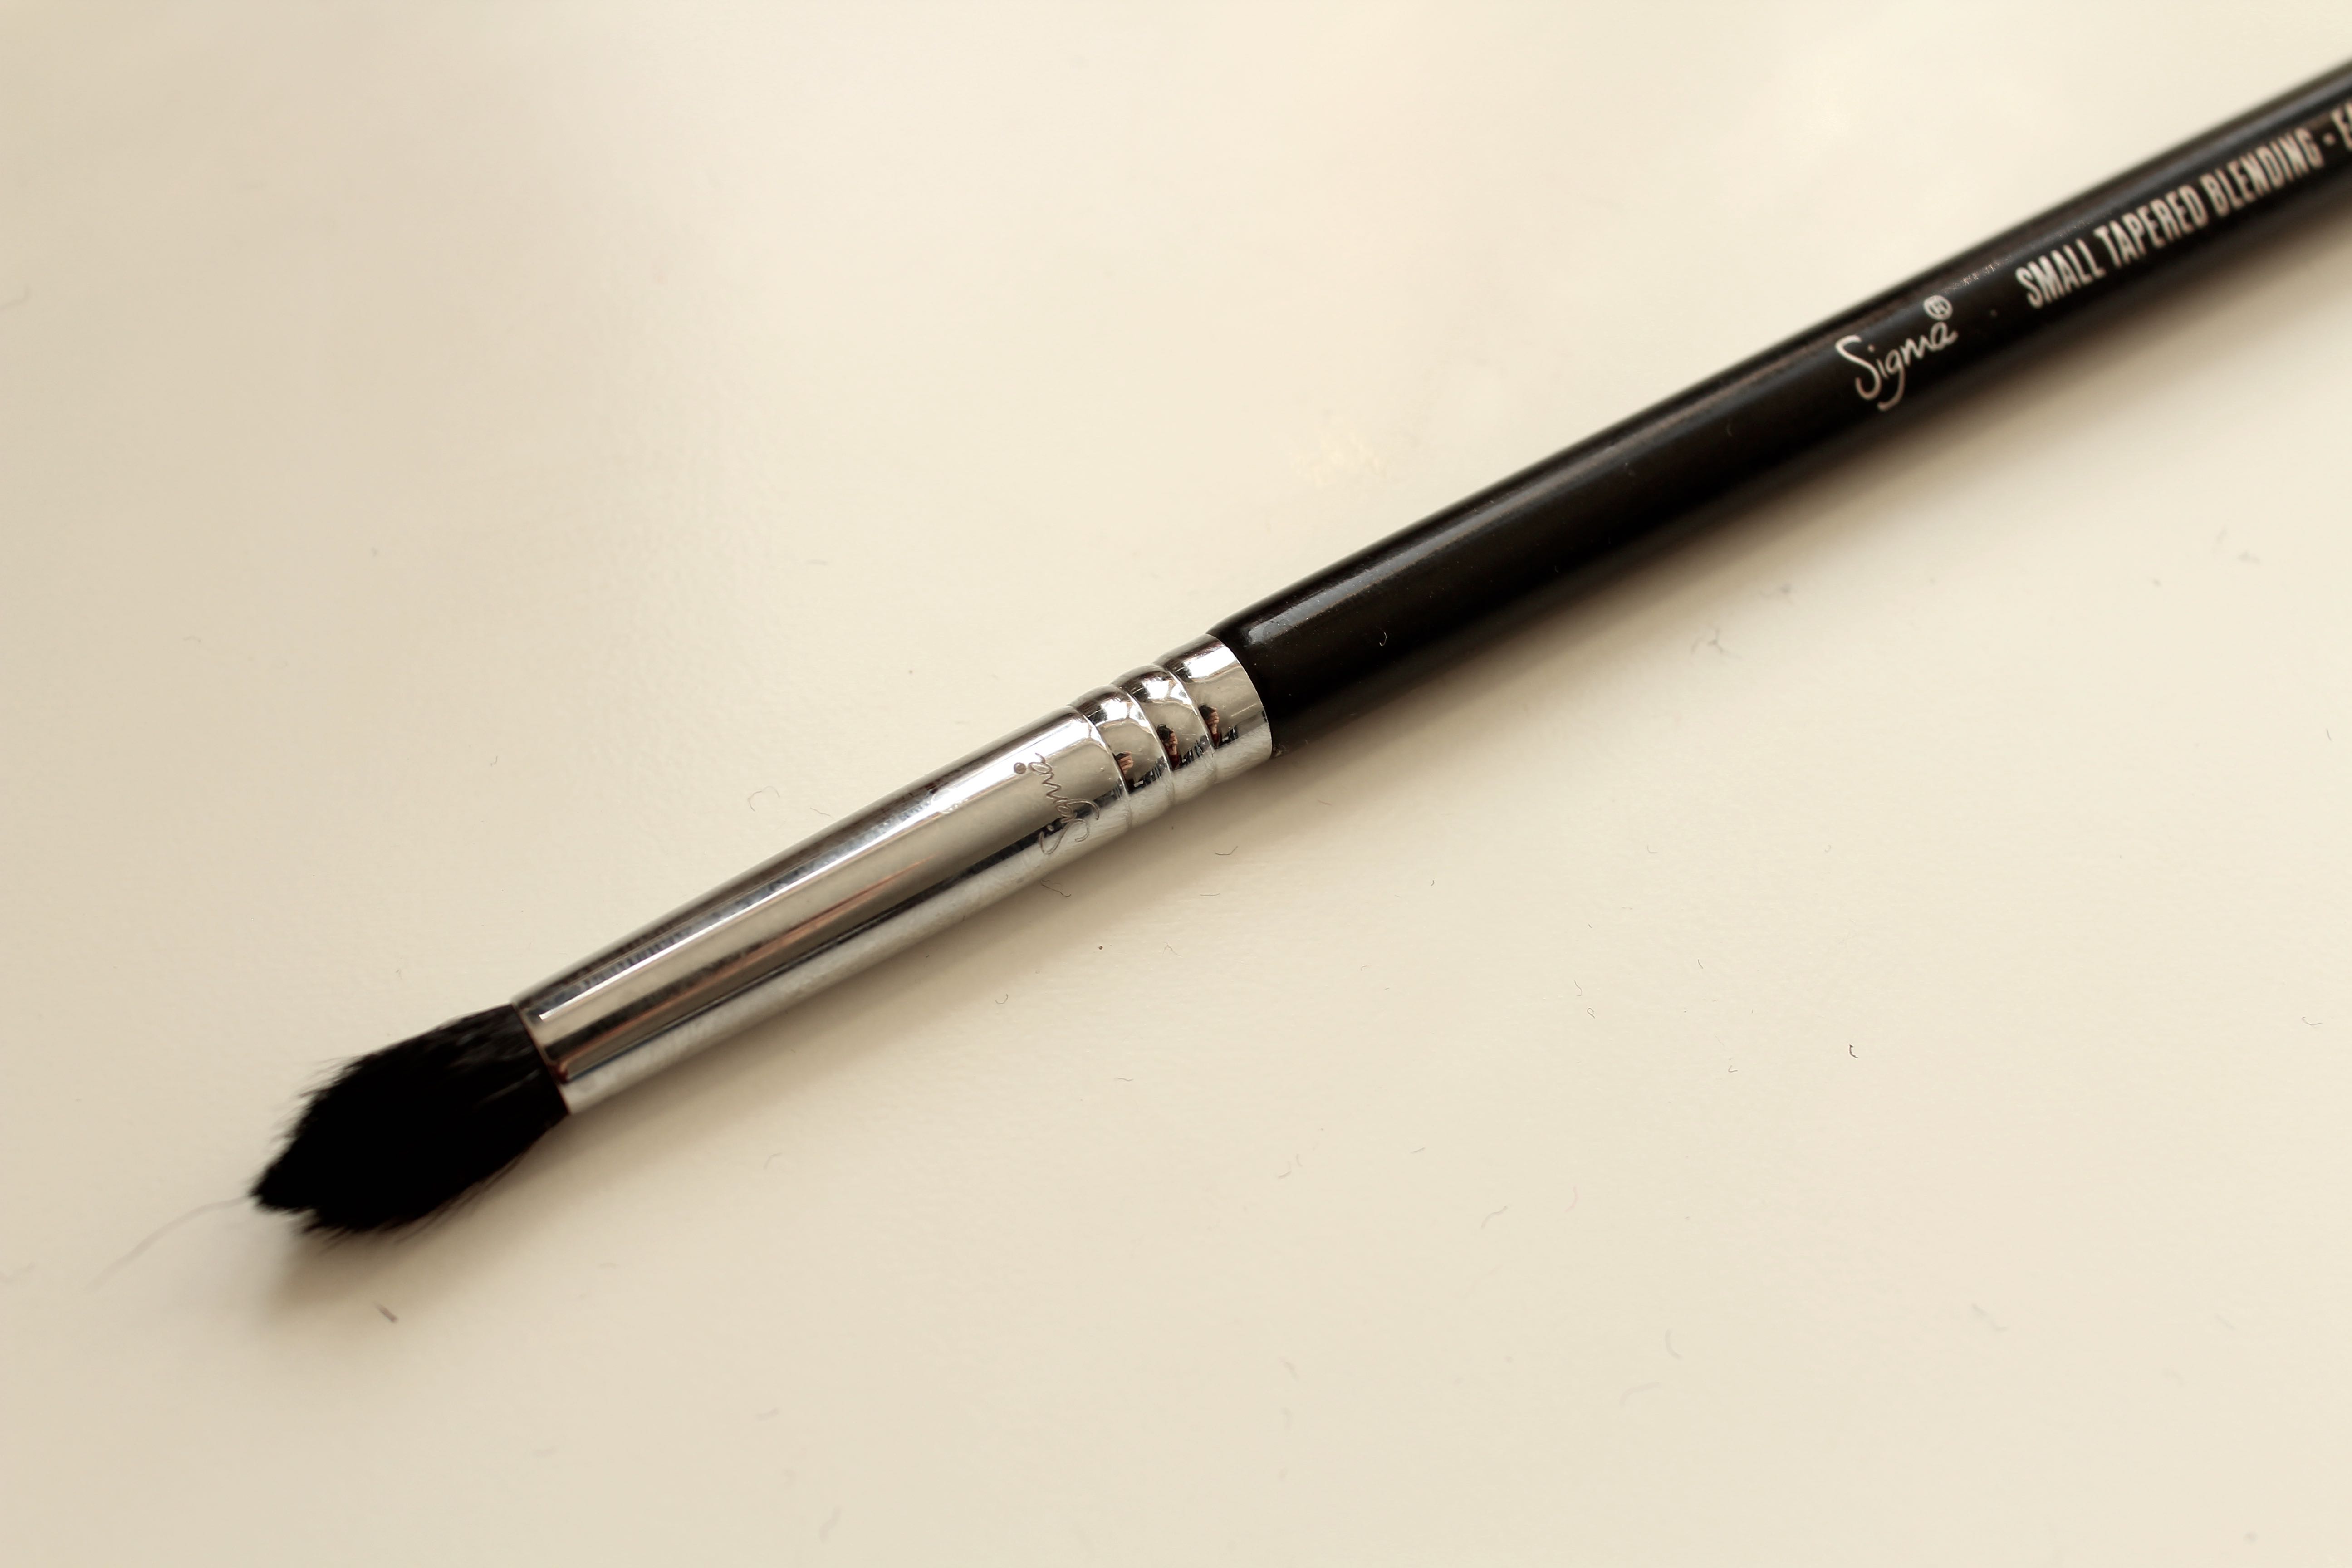 Best 7 Makeup Brushes for Smaller Eyes - Sigma E45 Small Tapered Blending Brush by Face Made up